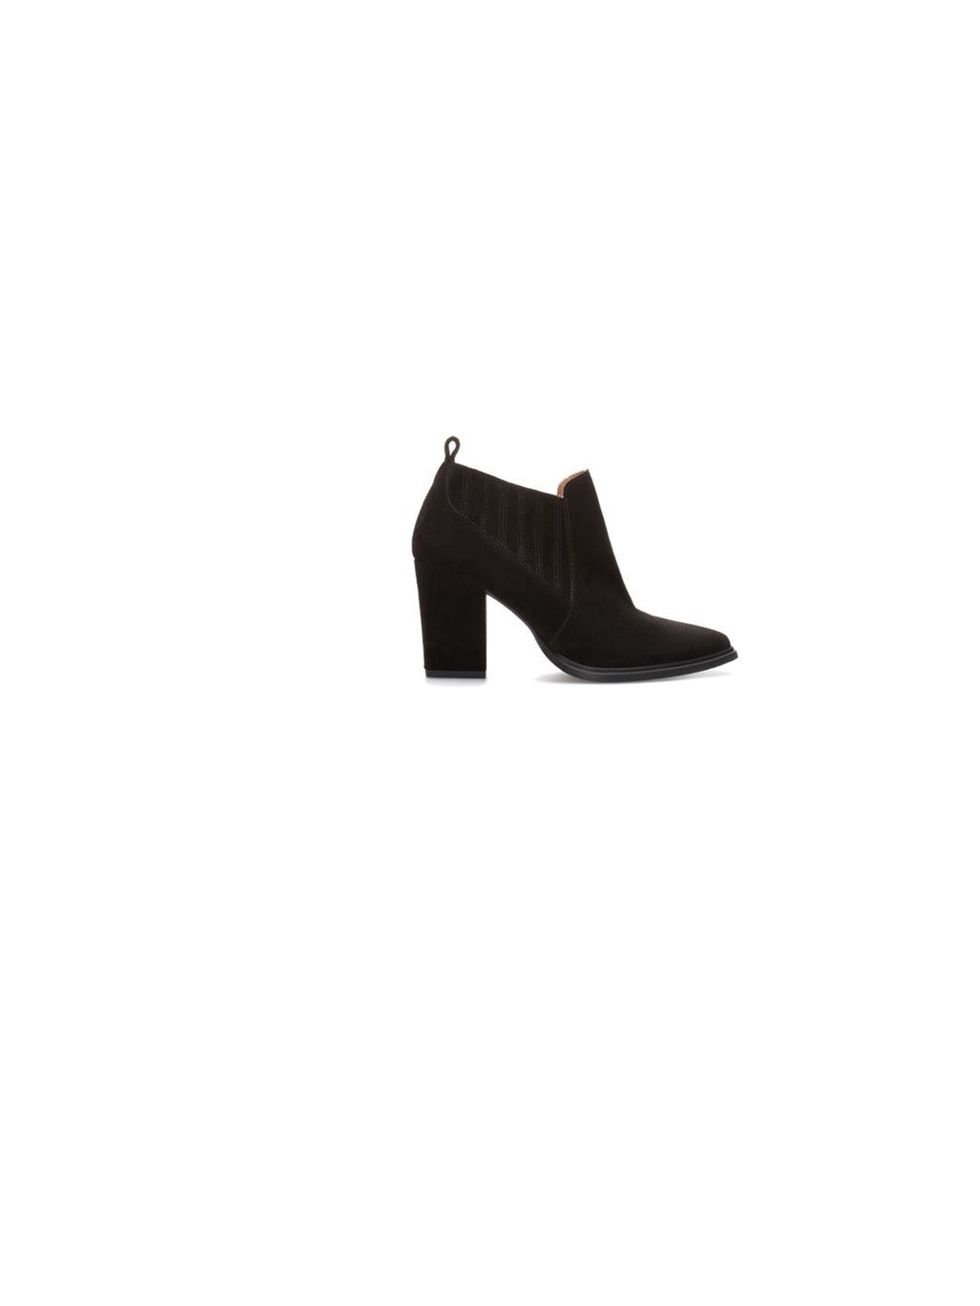 <p>Ankle boots are to autumn what sandals are to summer. Get your kicks with a block heeled pair, <a href="http://www.zara.com/uk/en/woman/shoes/basic-heel-ankle-boot-c269191p1376029.html">Zara</a> boots, £59.99</p>